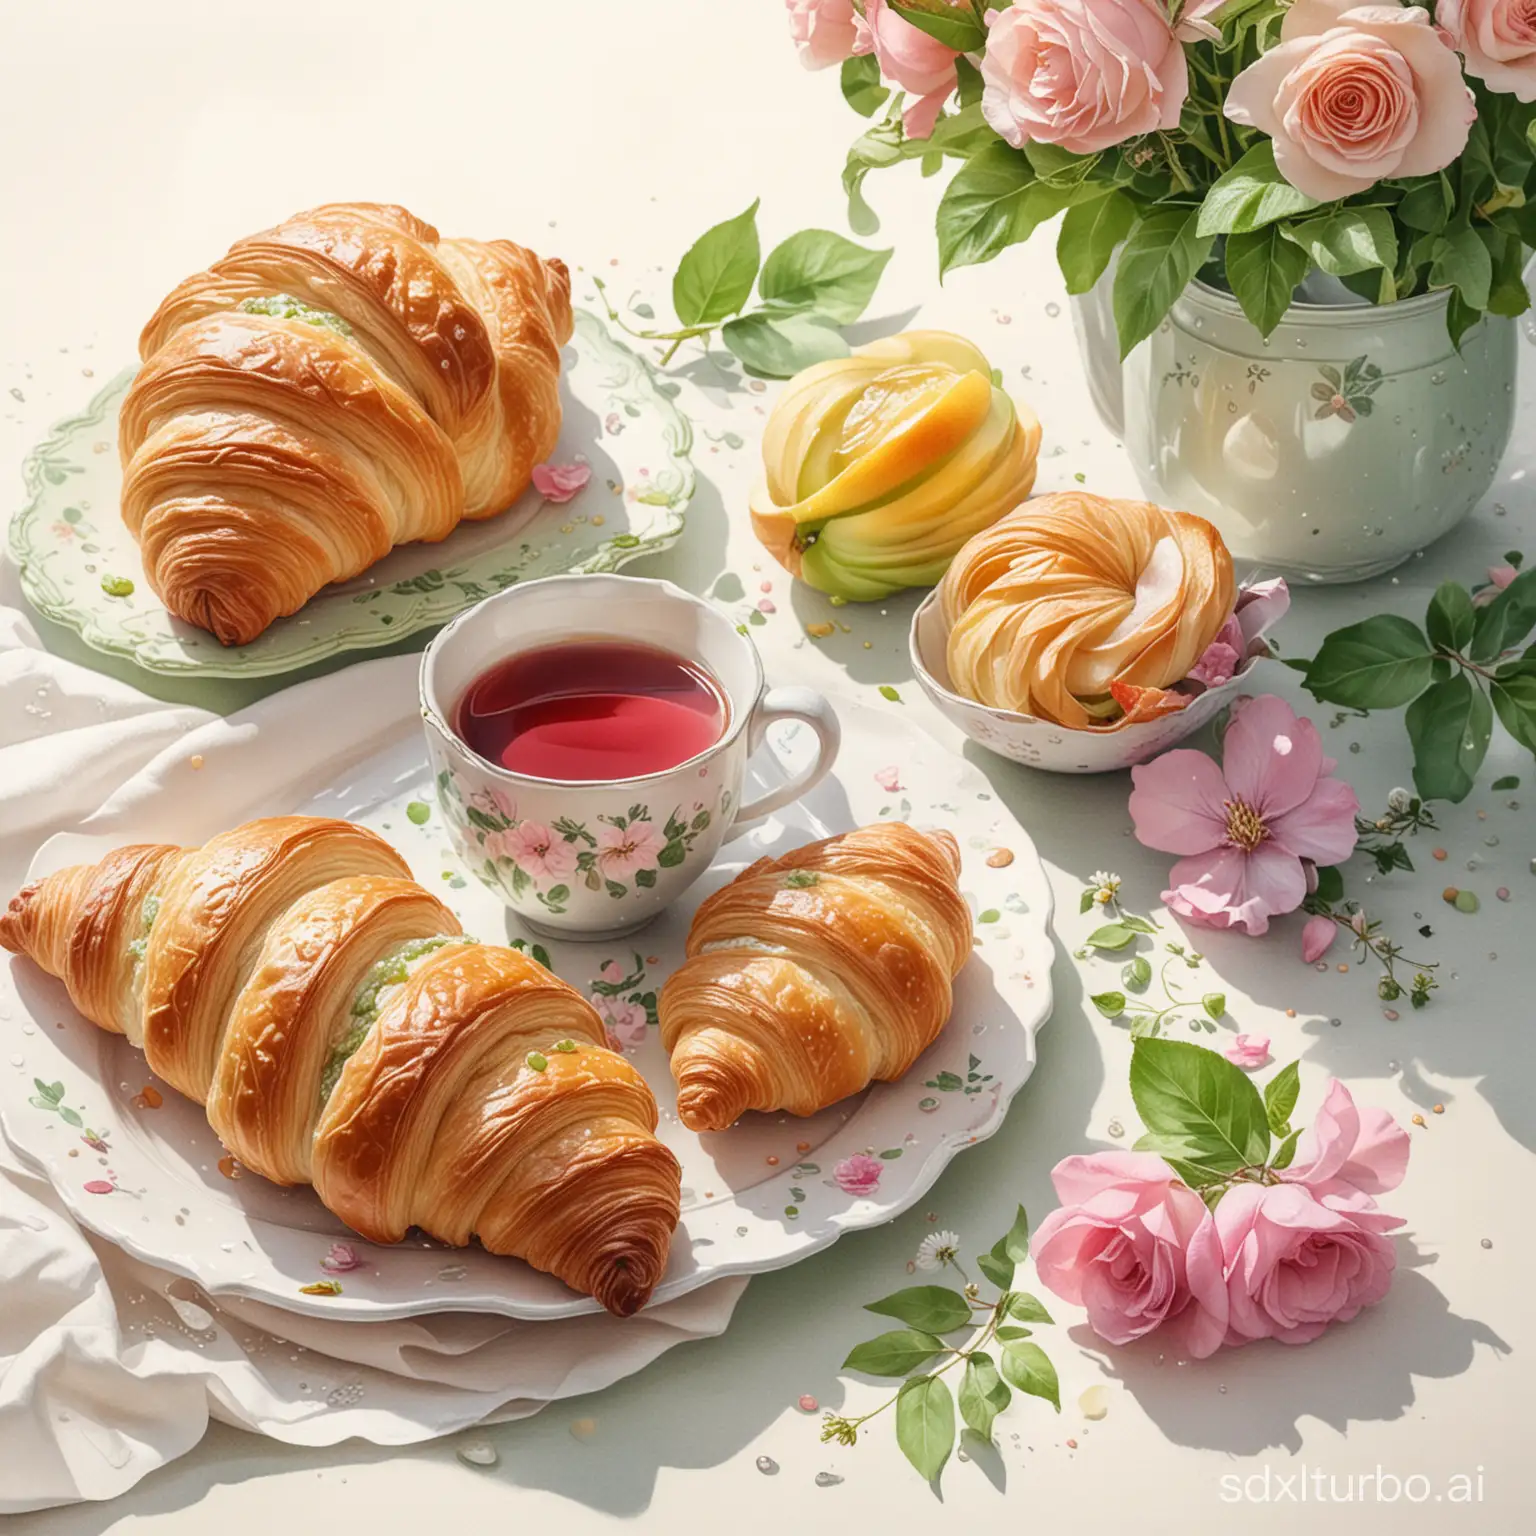 realistic food sketch, vintage, gently, water drops, sweet apple croissant puff pastry with jam and a cup of tea, flowers, spring, sun, Light Taupe, Verdepeche, Rose Quartz tones, shades of green, light green, sun, watercolor pencil drawing, double exposure, bottom view, fantasy, sketching, ink, watercolor detailed deep drawing,